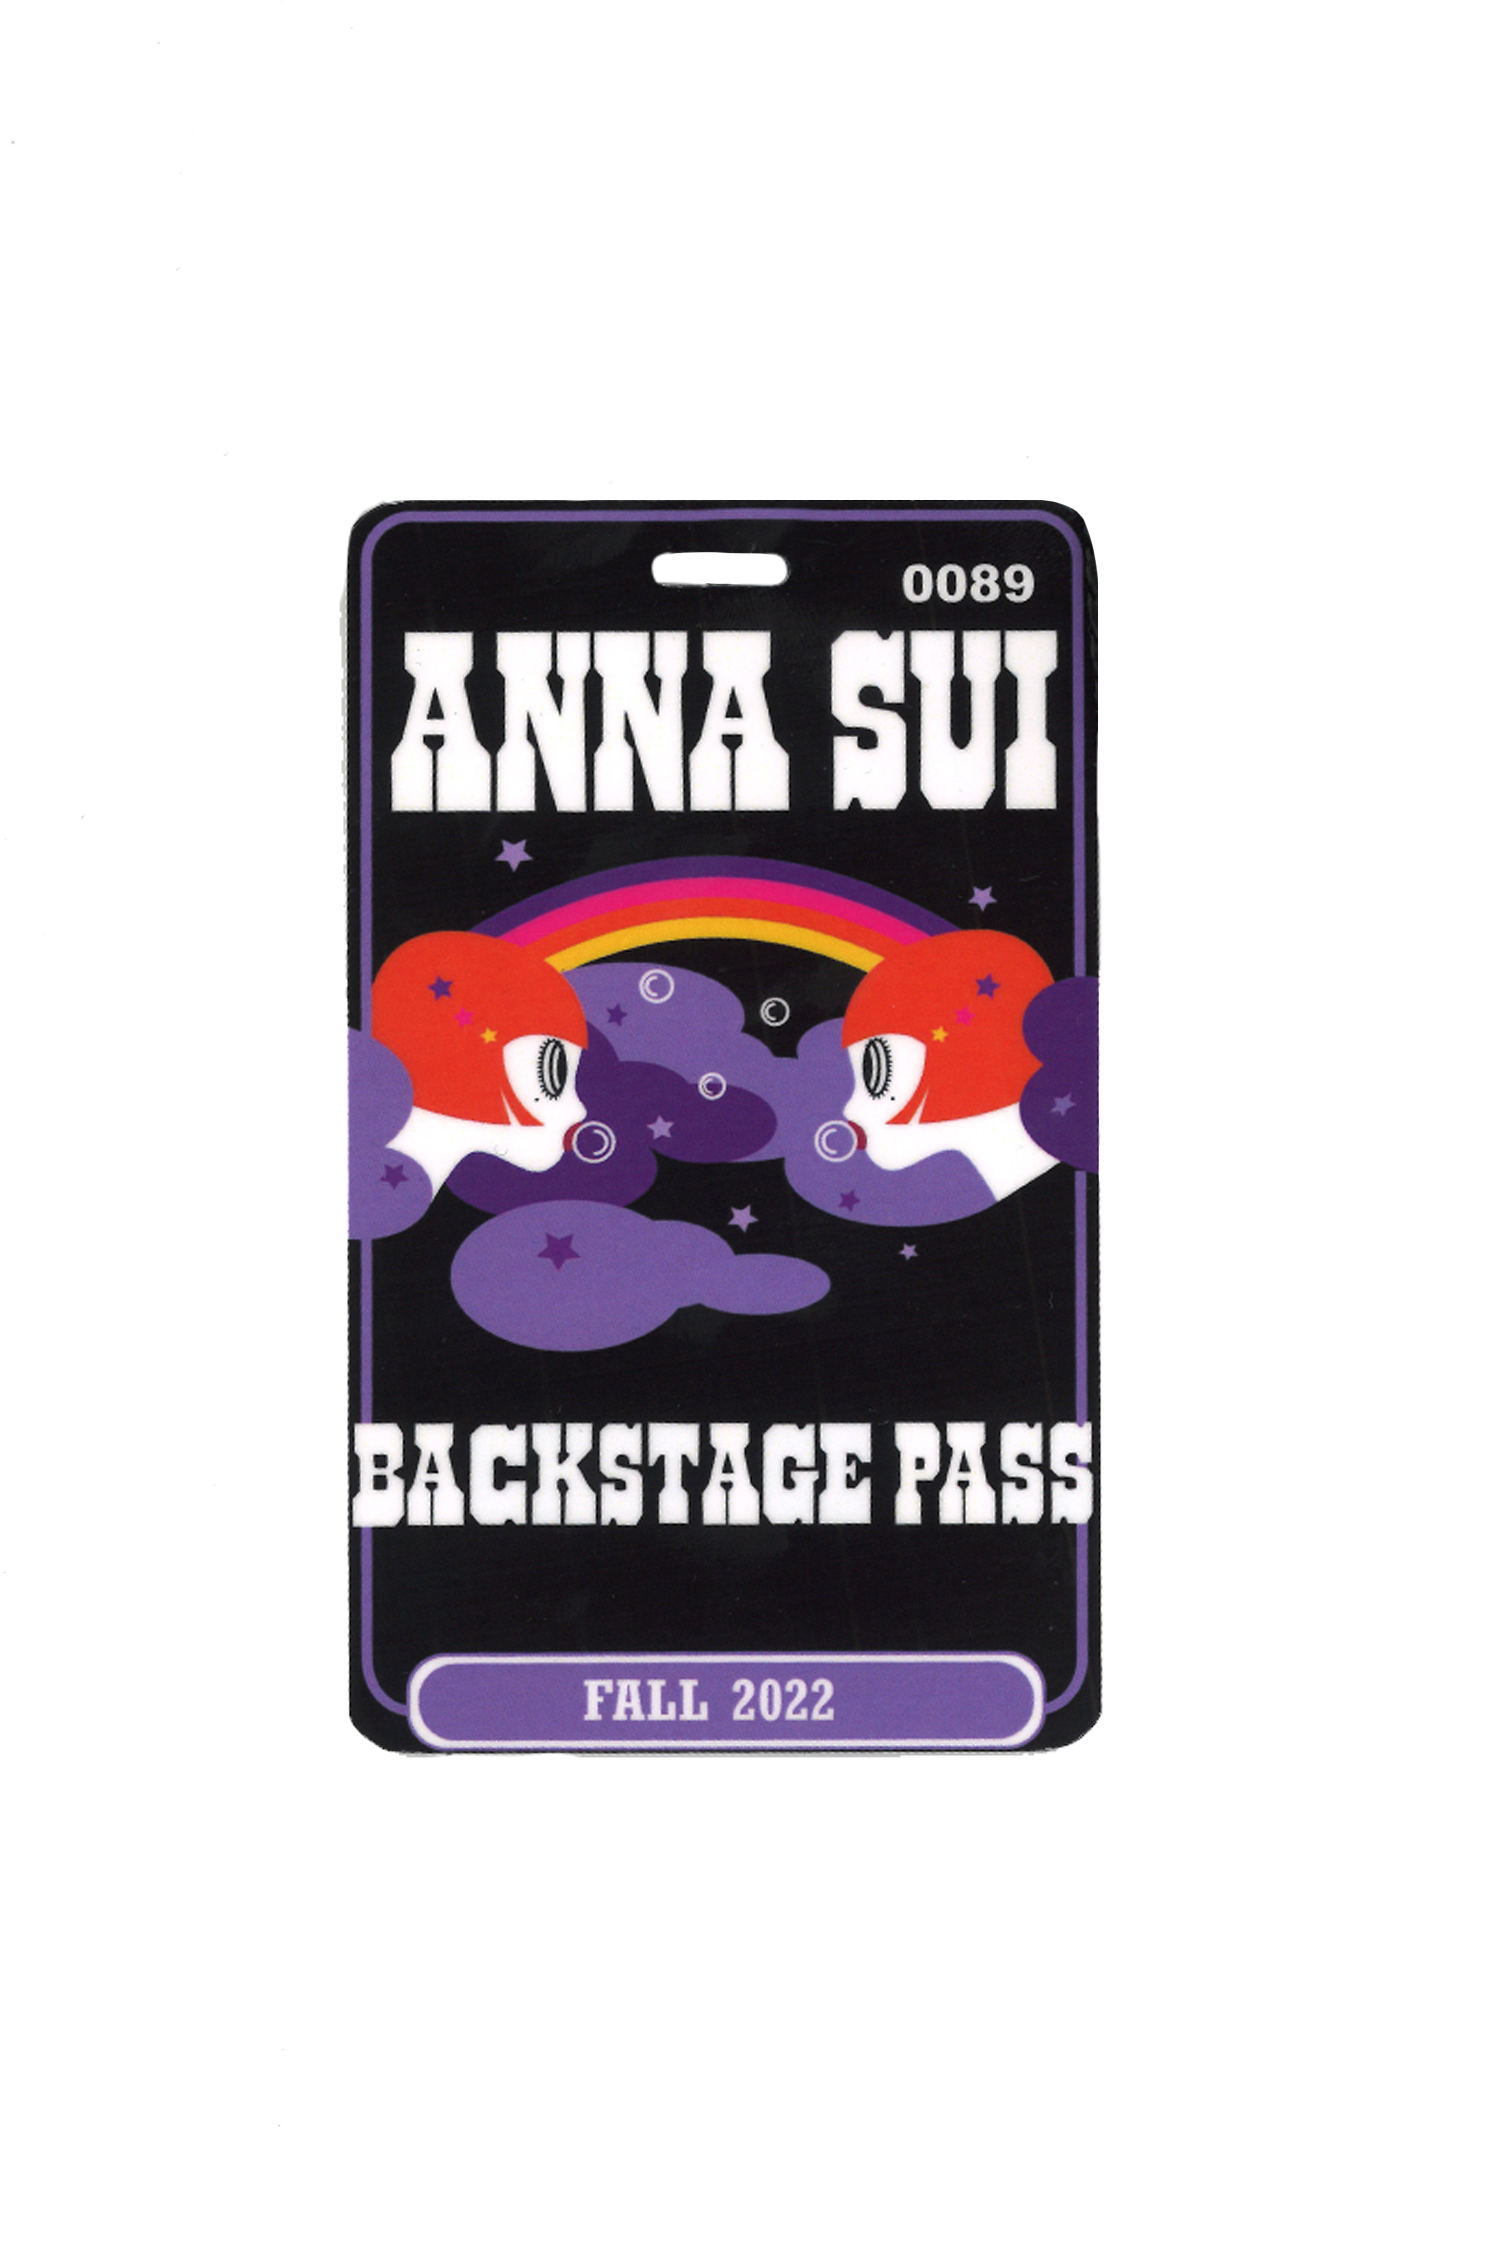 Anna Sui FW22 Limited Edition Backstage Pass - Anna Sui